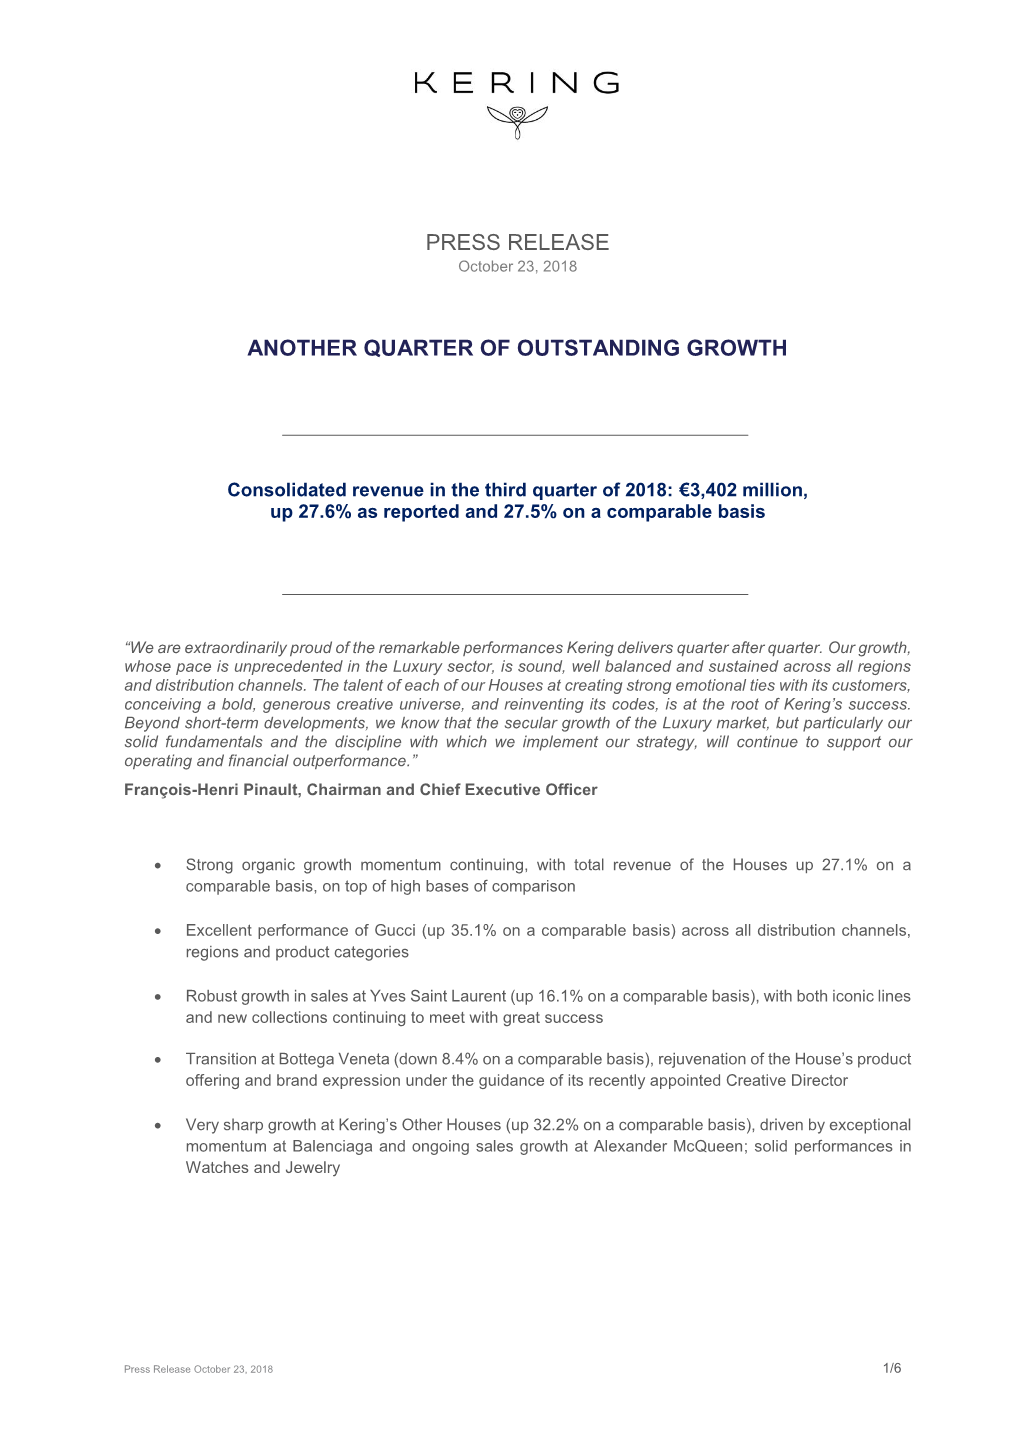 Press Release Another Quarter of Outstanding